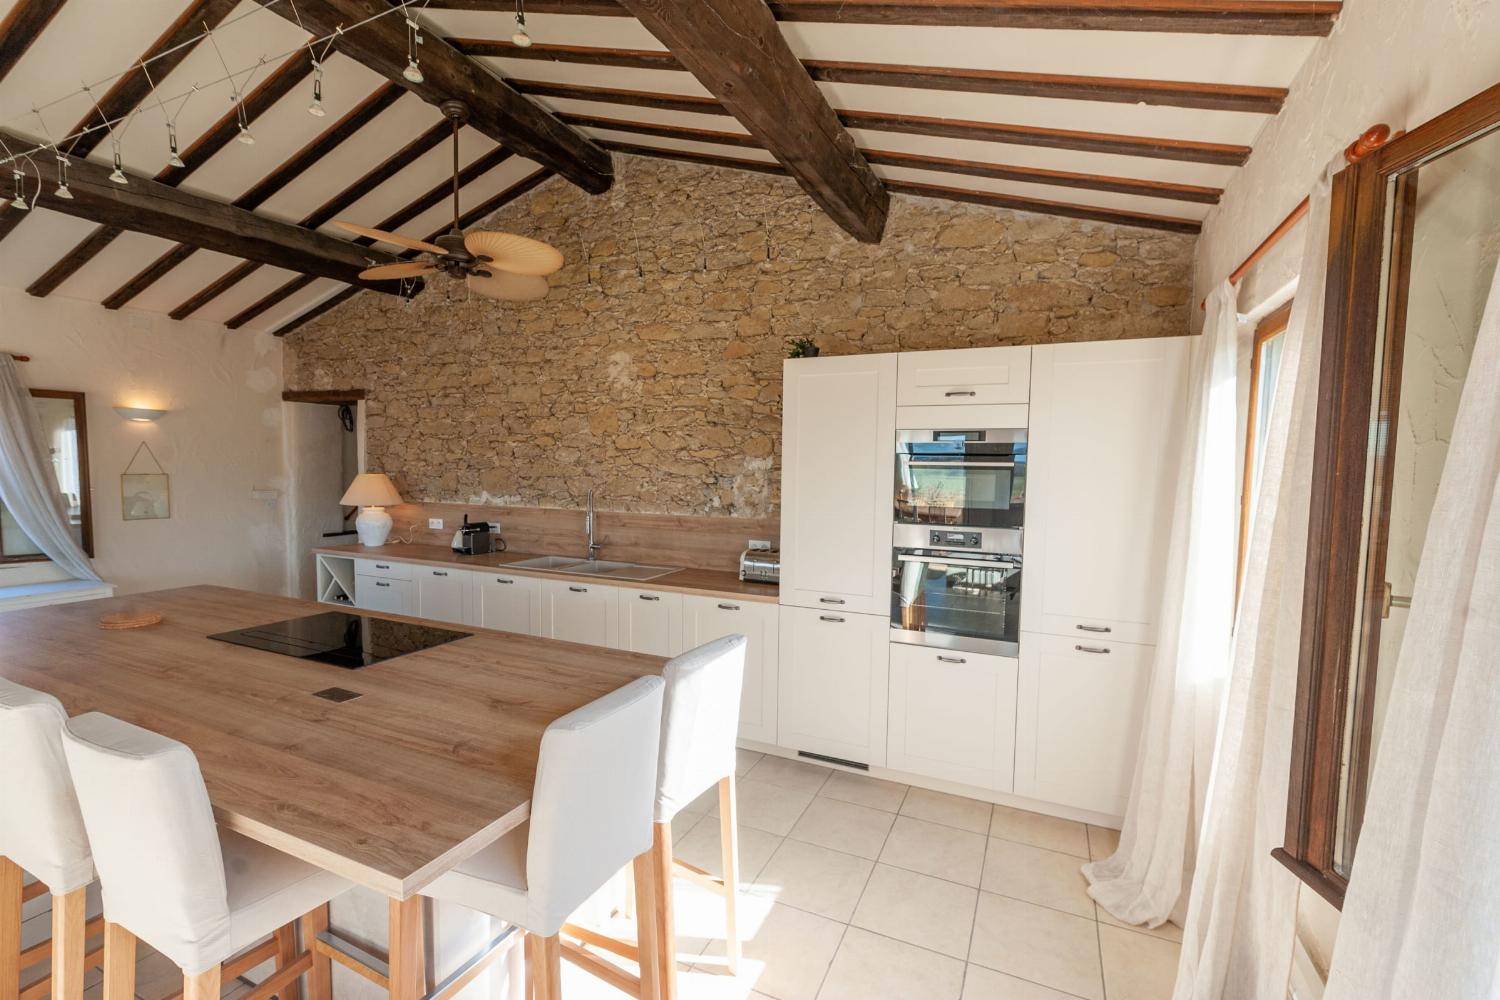 Kitchen | Rental home in South of France